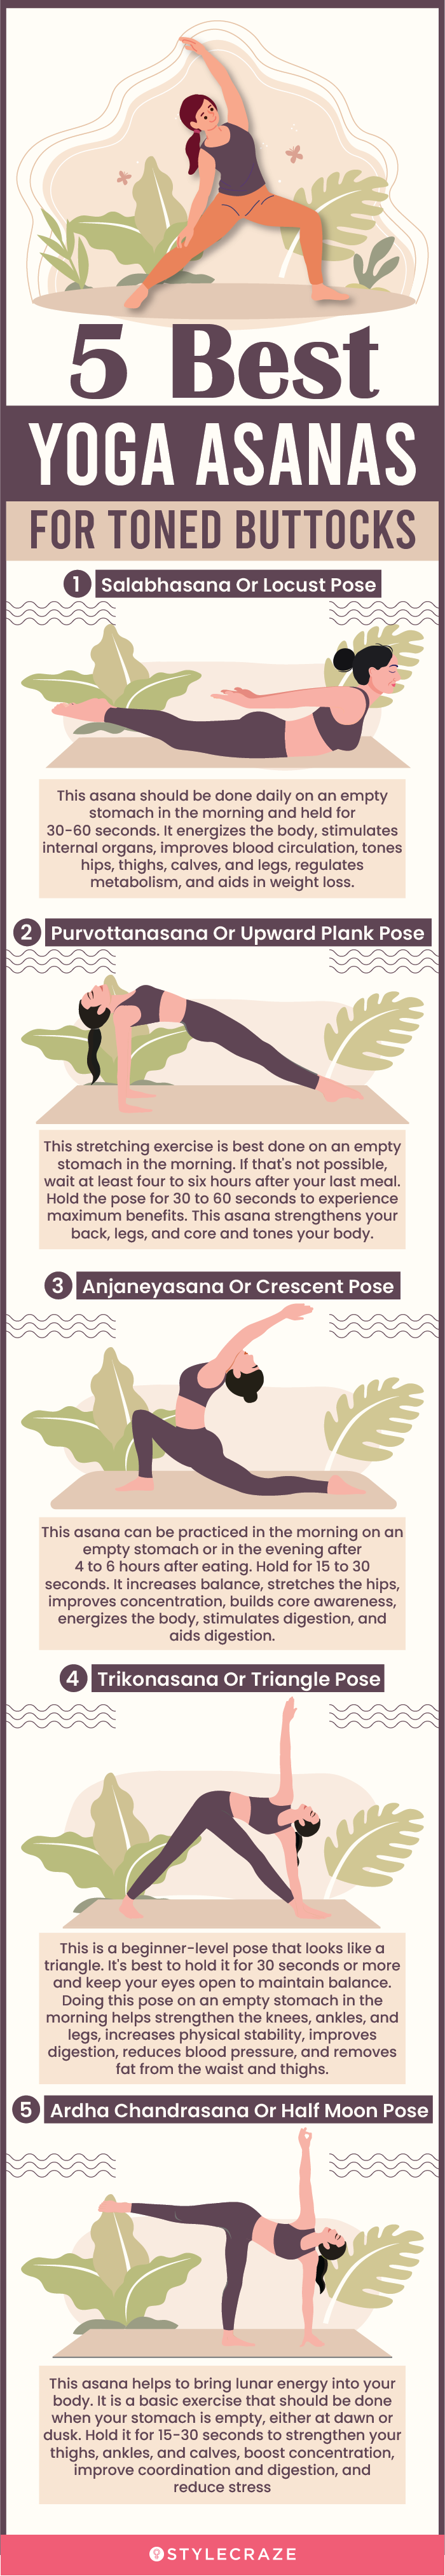 5 best yoga asanas for toned buttocks (infographic)